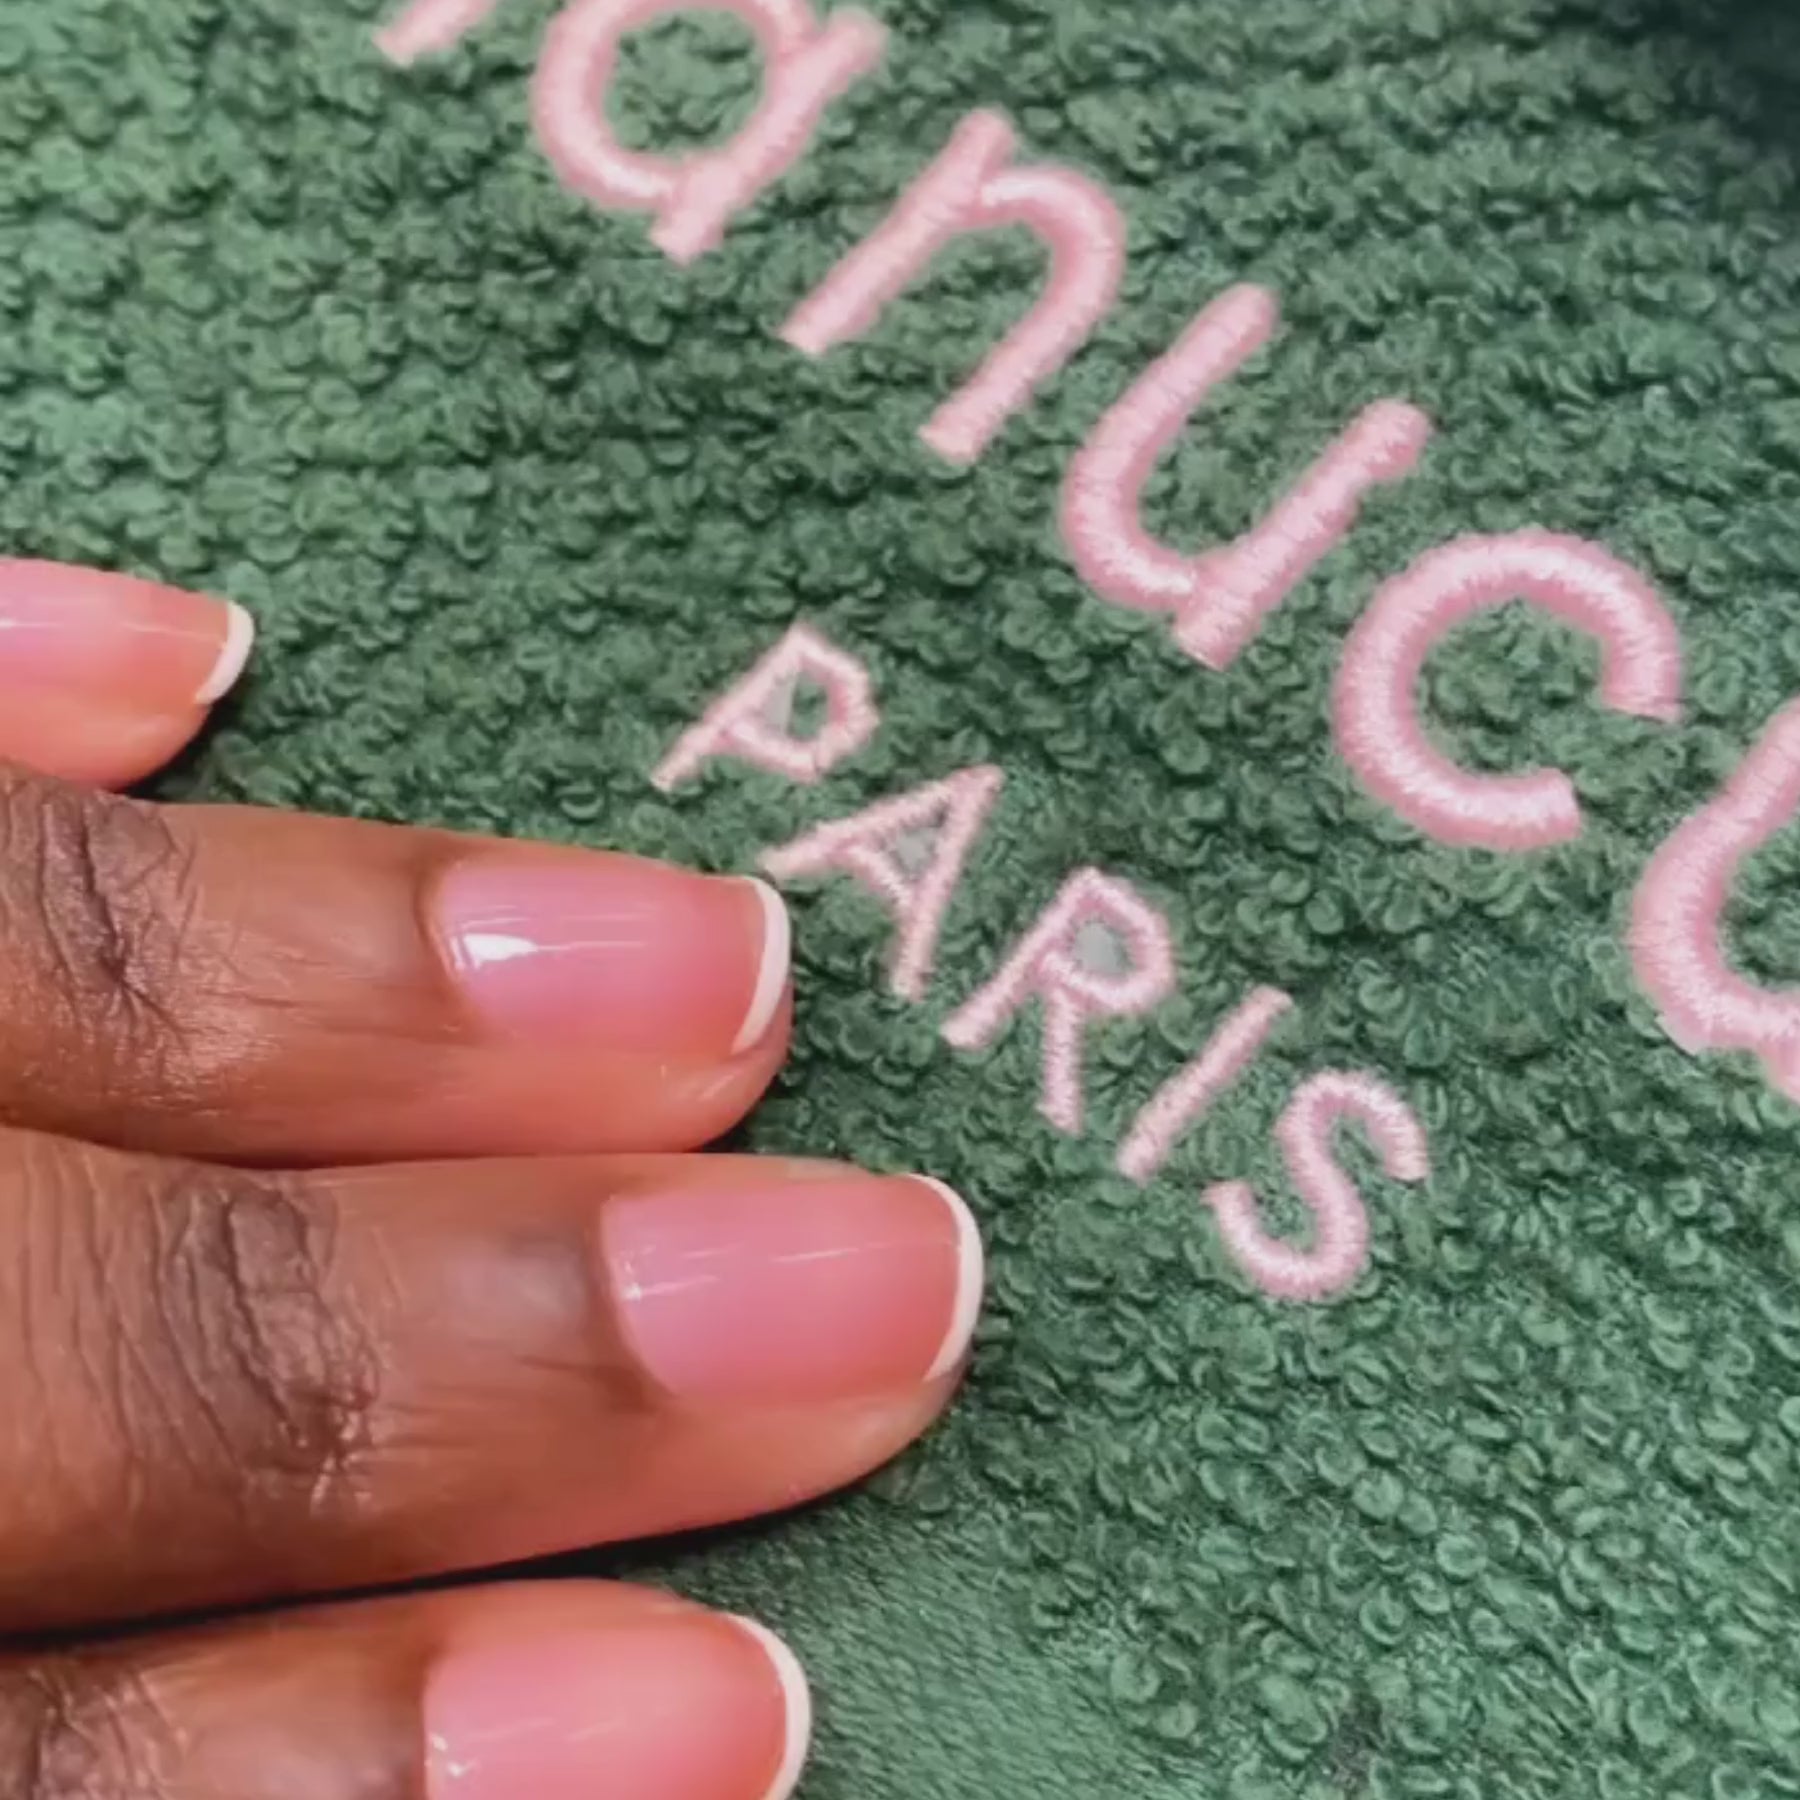 Paint A French Manicure Perfectly! - YouTube